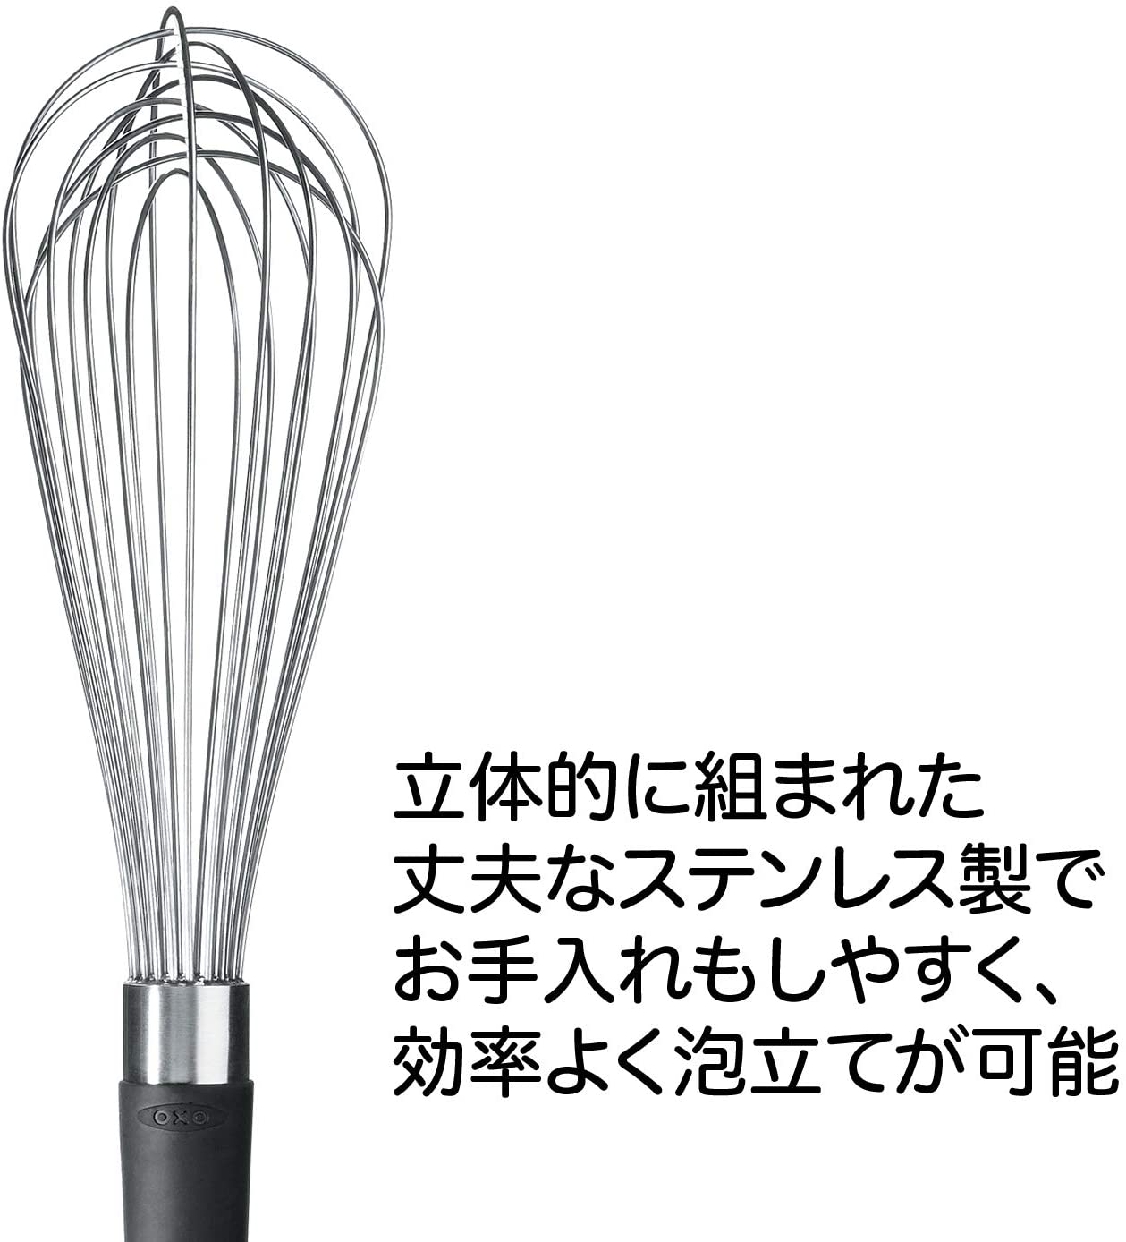 OXO(オクソー) 泡立て器 バルーンウィスク (小) 74091の商品画像サムネ4 